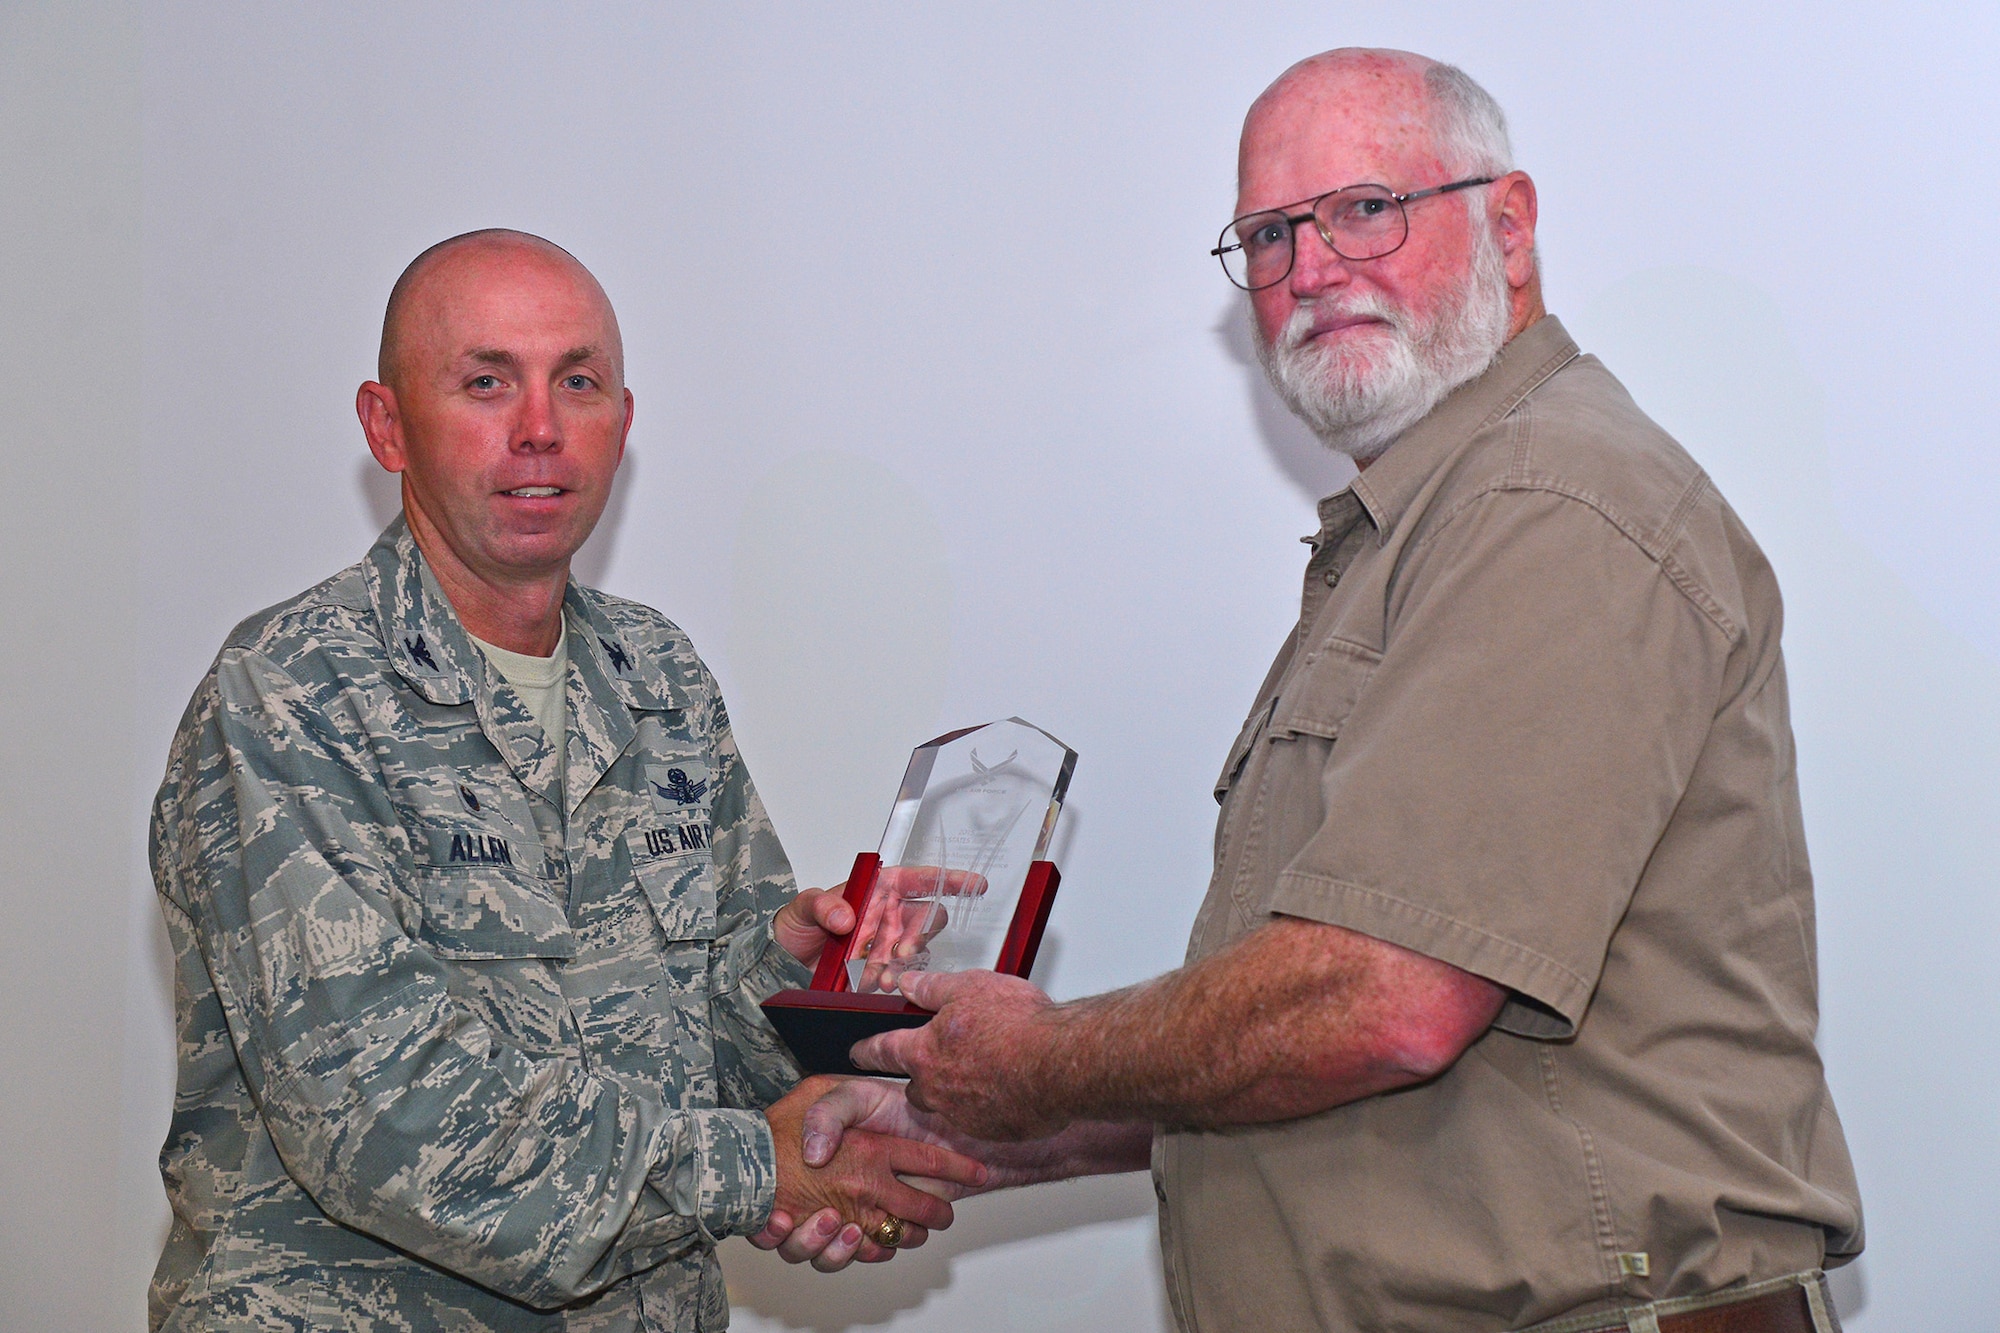 Col. Ron Allen, 341st Missile Wing commander, presents David Phillips, 341st Munitions Squadron technical advisor and equipment specialist, with the 2015 Lt. Gen. Leo Marquez Air Force level award July 20, 2016, at Malmstrom Air Force Base, Mont. The award recognizes maintenance professionals in the aircraft, munitions, missile and communications fields for sustained job performance, knowledge and involvement in their duties. (U.S. Air Force photo/Airman 1st Class Daniel Brosam)